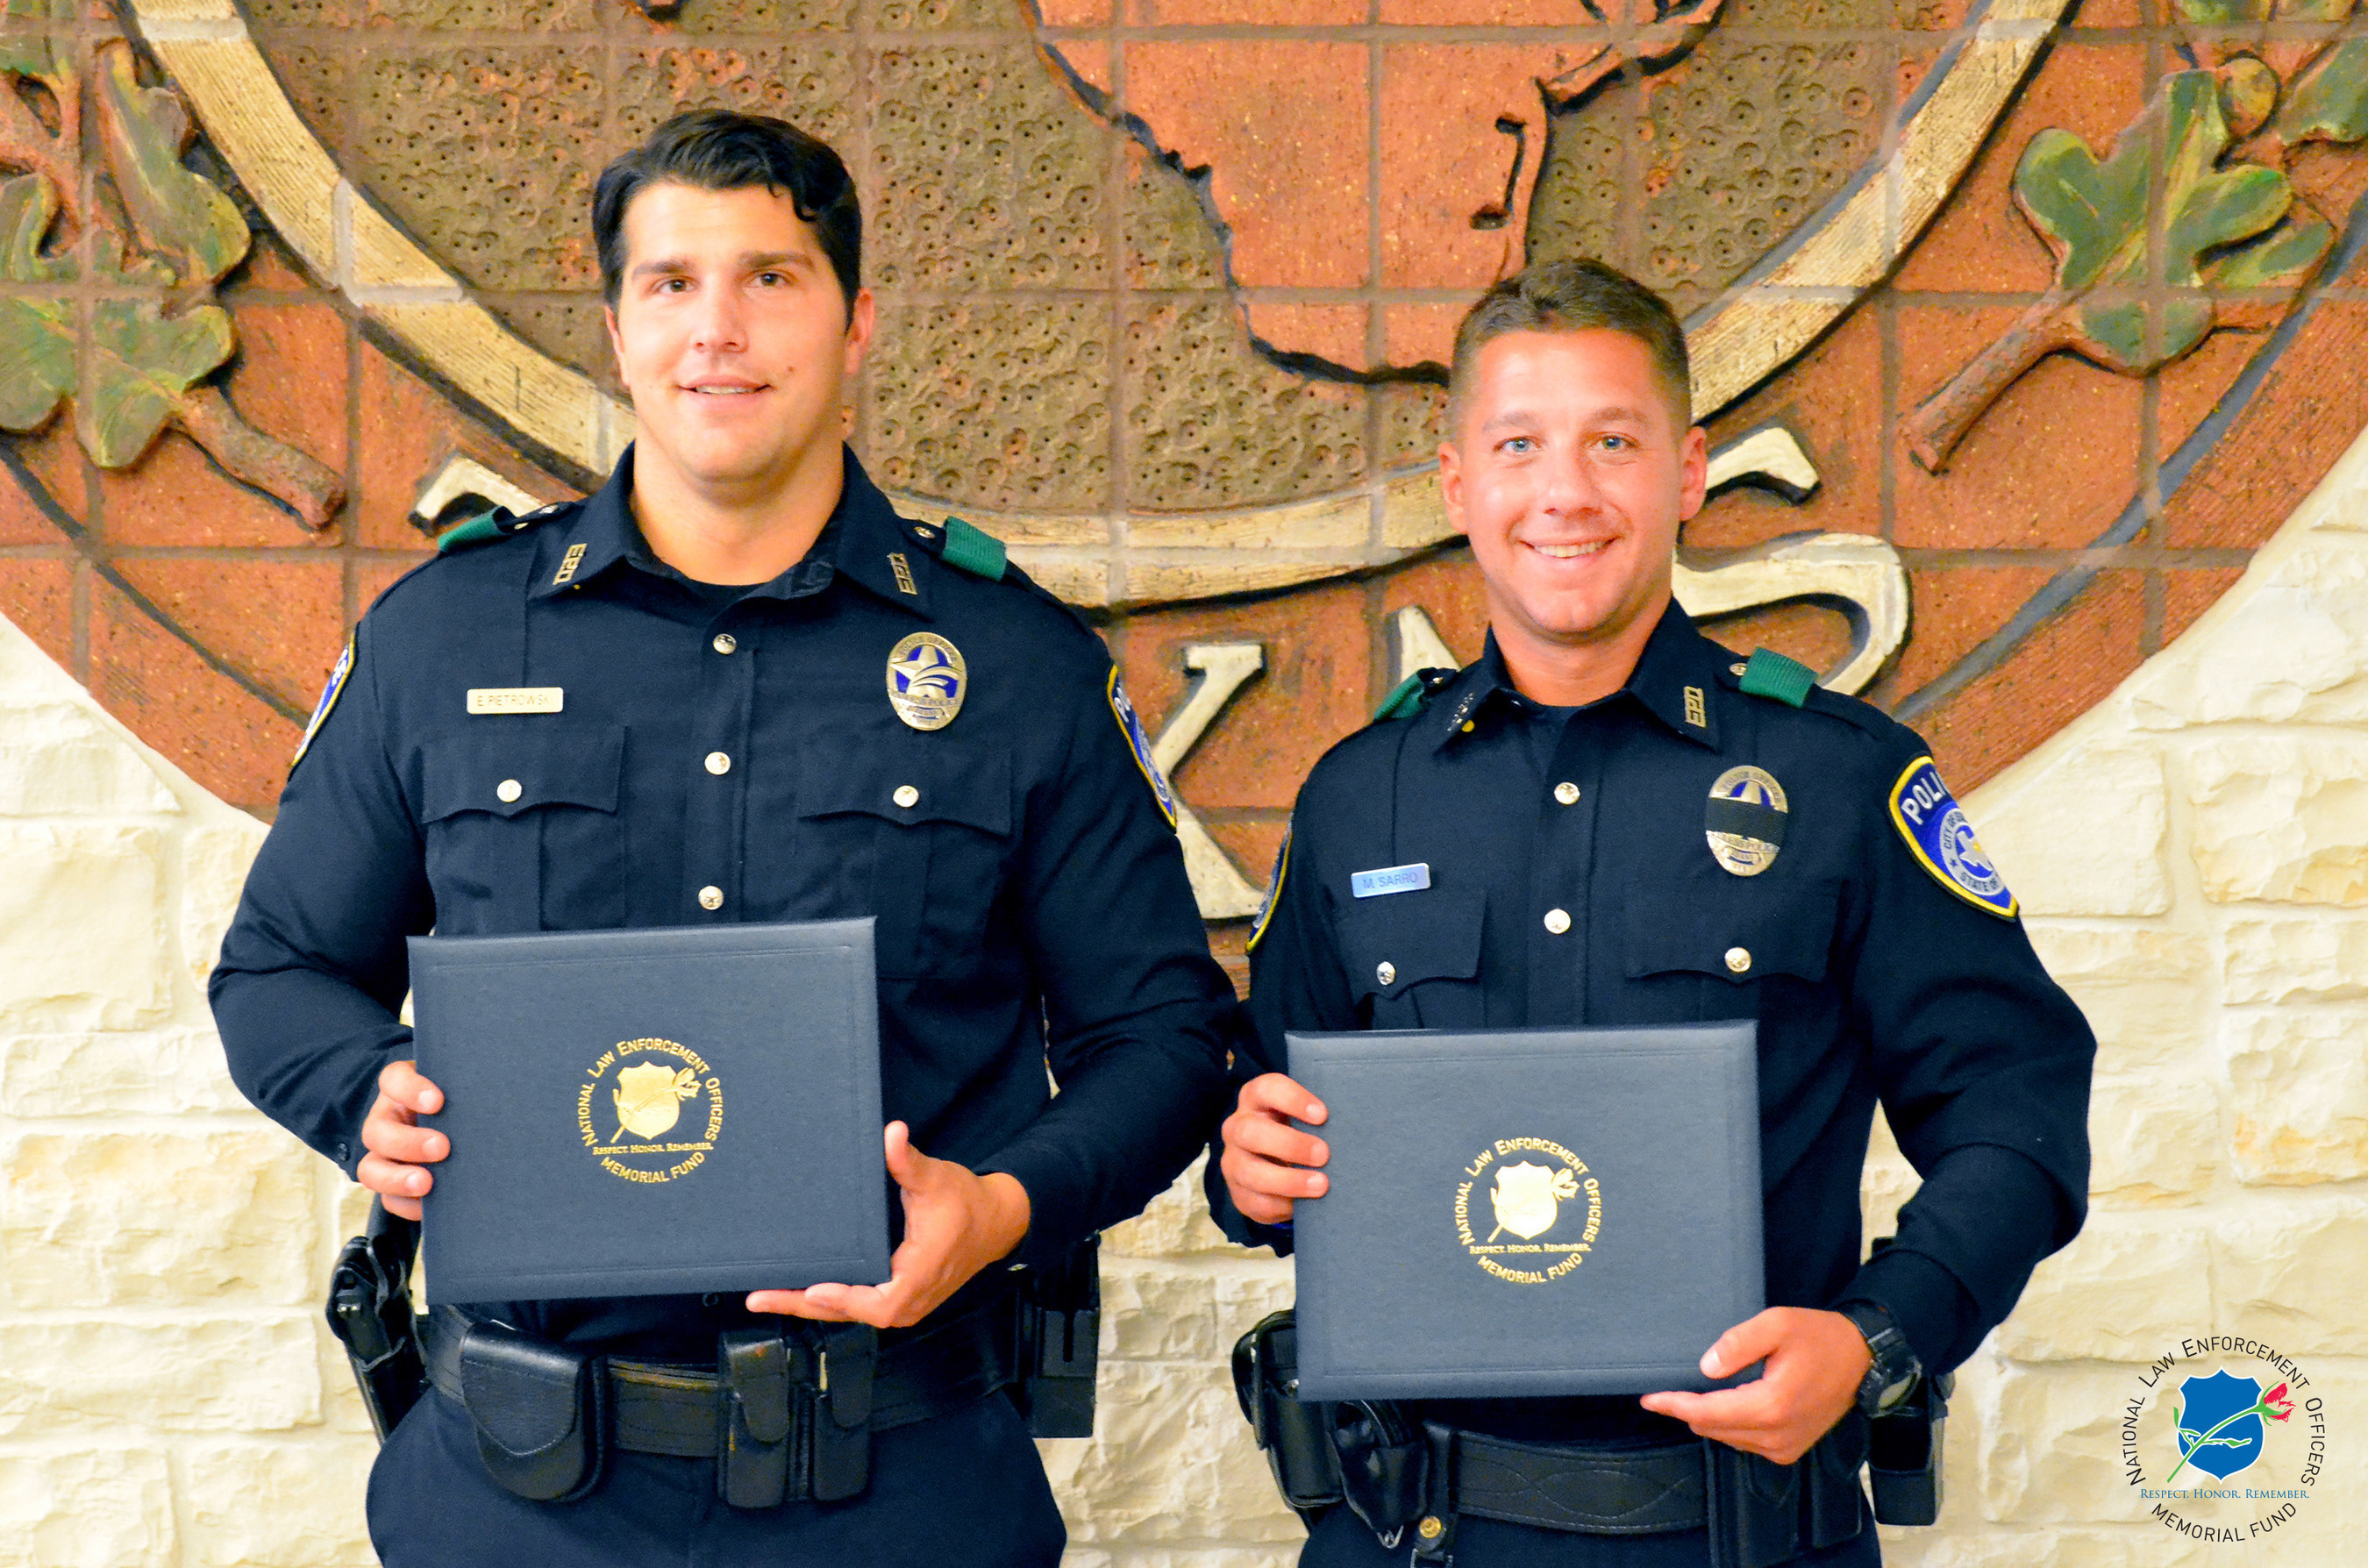 The National Law Enforcement Officers Memorial Fund has selected Officers Ed Pietrowski and Michael Sarro, of the Euless (TX) Police Department, as the recipients of its Officer of the Month Award for August 2016.